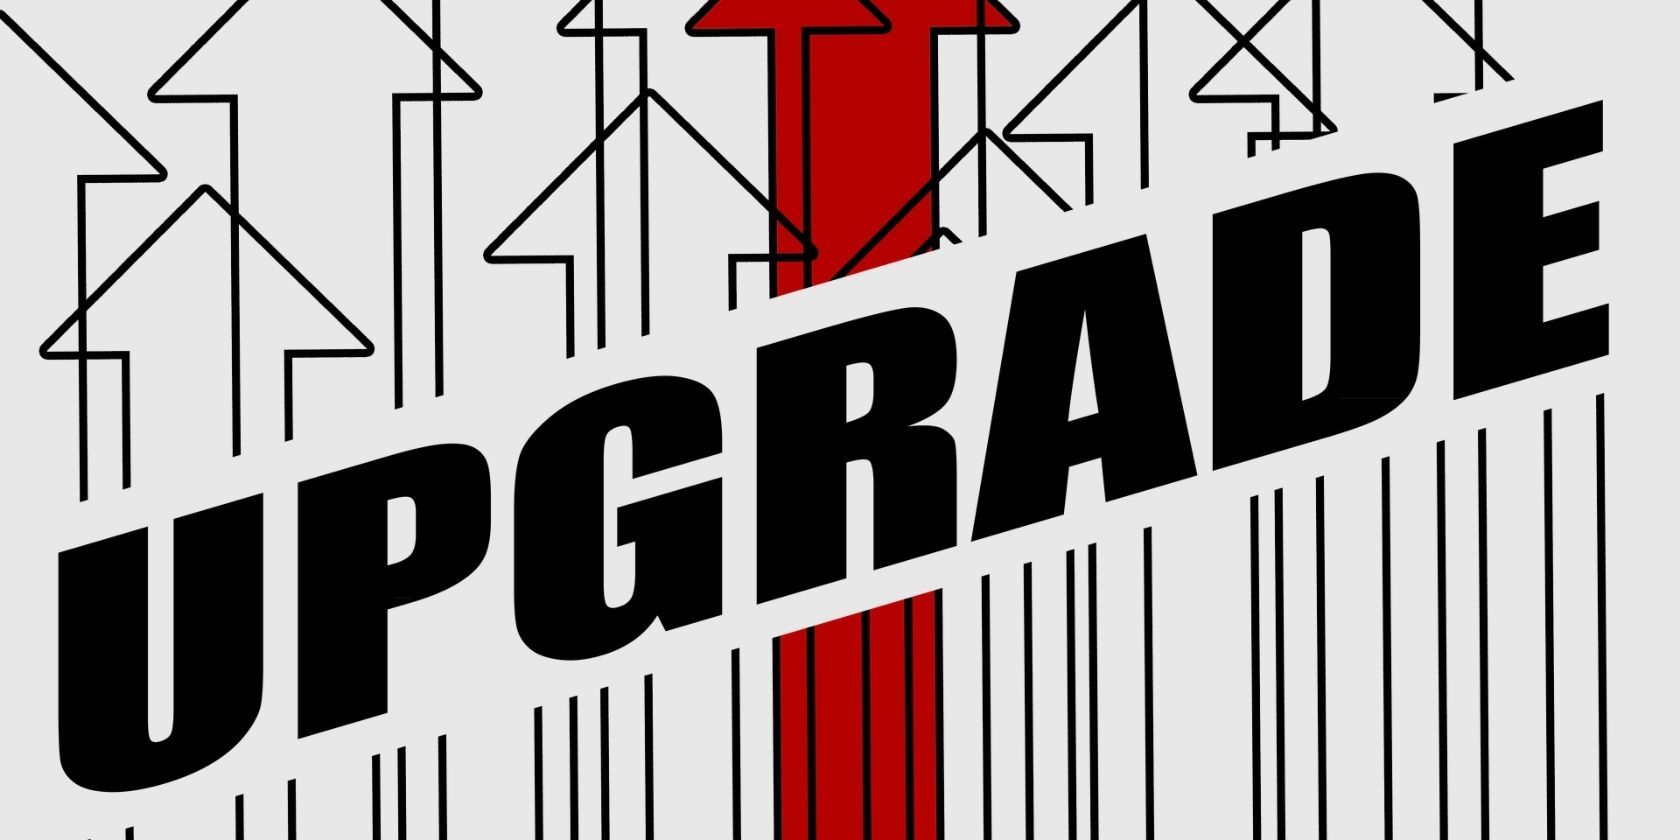 upgrade graphic with arrows